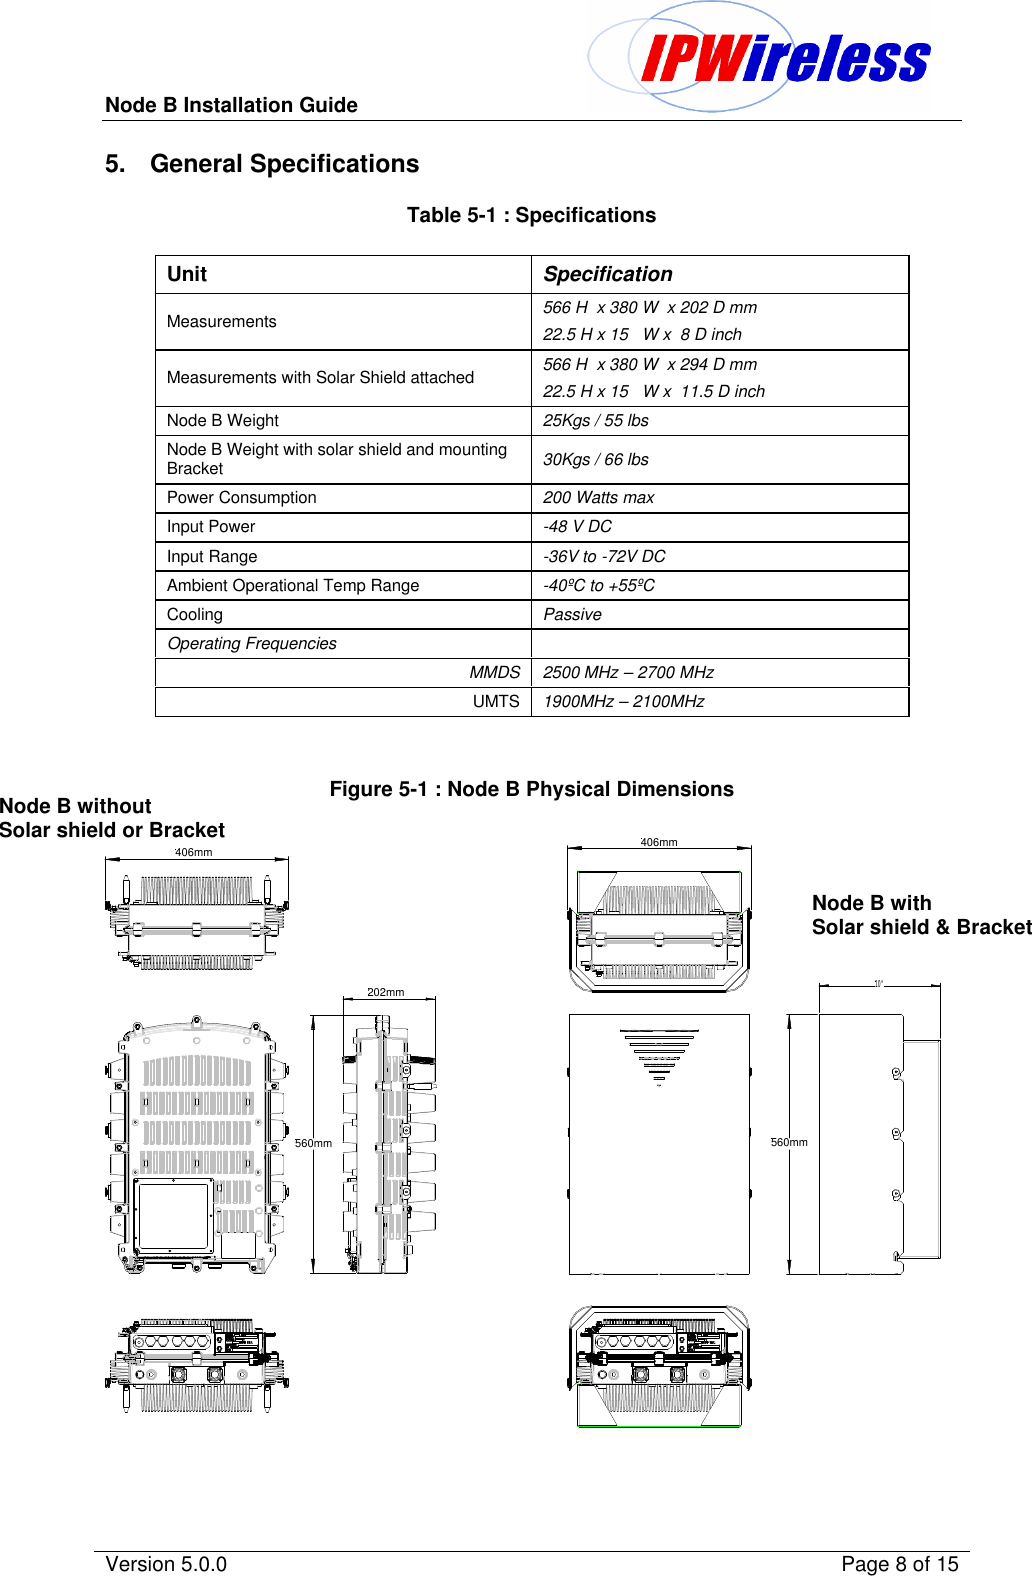 Node B Installation Guide                                               Version 5.0.0    Page 8 of 15  5. General Specifications Table 5-1 : Specifications   Figure 5-1 : Node B Physical Dimensions          10&quot;406mm406mm202mm560mm 560mm     Unit  Specification Measurements 566 H  x 380 W  x 202 D mm 22.5 H x 15   W x  8 D inch Measurements with Solar Shield attached 566 H  x 380 W  x 294 D mm 22.5 H x 15   W x  11.5 D inch Node B Weight  25Kgs / 55 lbs Node B Weight with solar shield and mounting Bracket 30Kgs / 66 lbs Power Consumption 200 Watts max Input Power -48 V DC Input Range -36V to -72V DC Ambient Operational Temp Range -40ºC to +55ºC Cooling Passive Operating Frequencies   MMDS 2500 MHz – 2700 MHz UMTS 1900MHz – 2100MHz Node B without Solar shield or Bracket Node B with Solar shield &amp; Bracket 